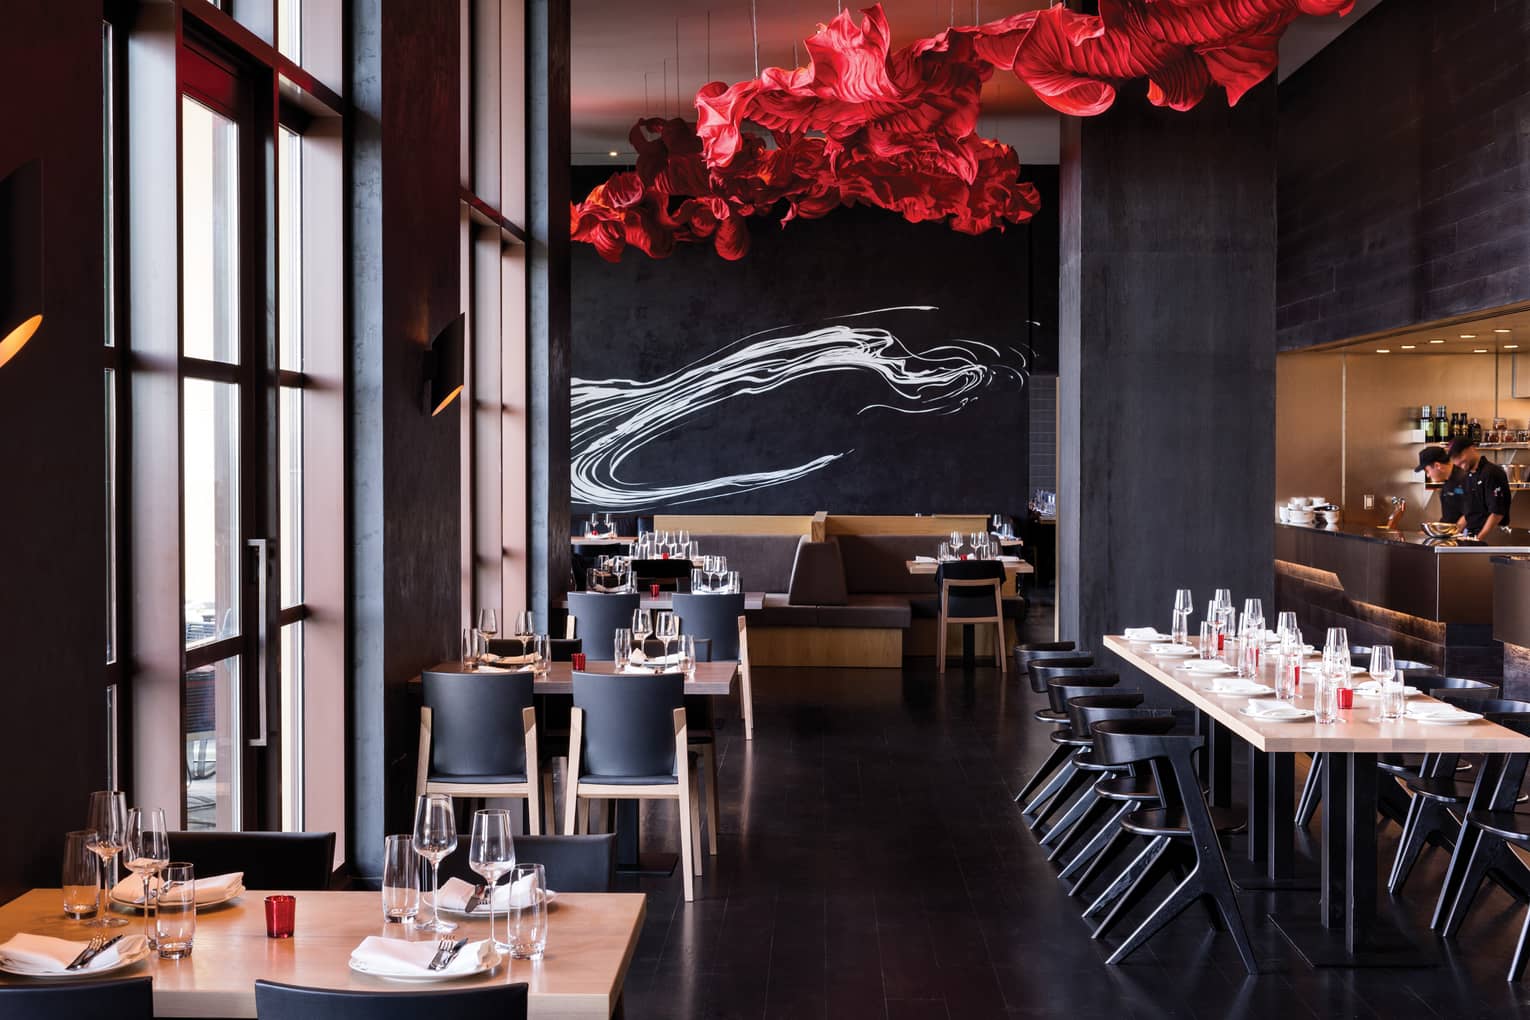 A red sculpture on the ceiling and red and white accents illuminate the Capa dining room